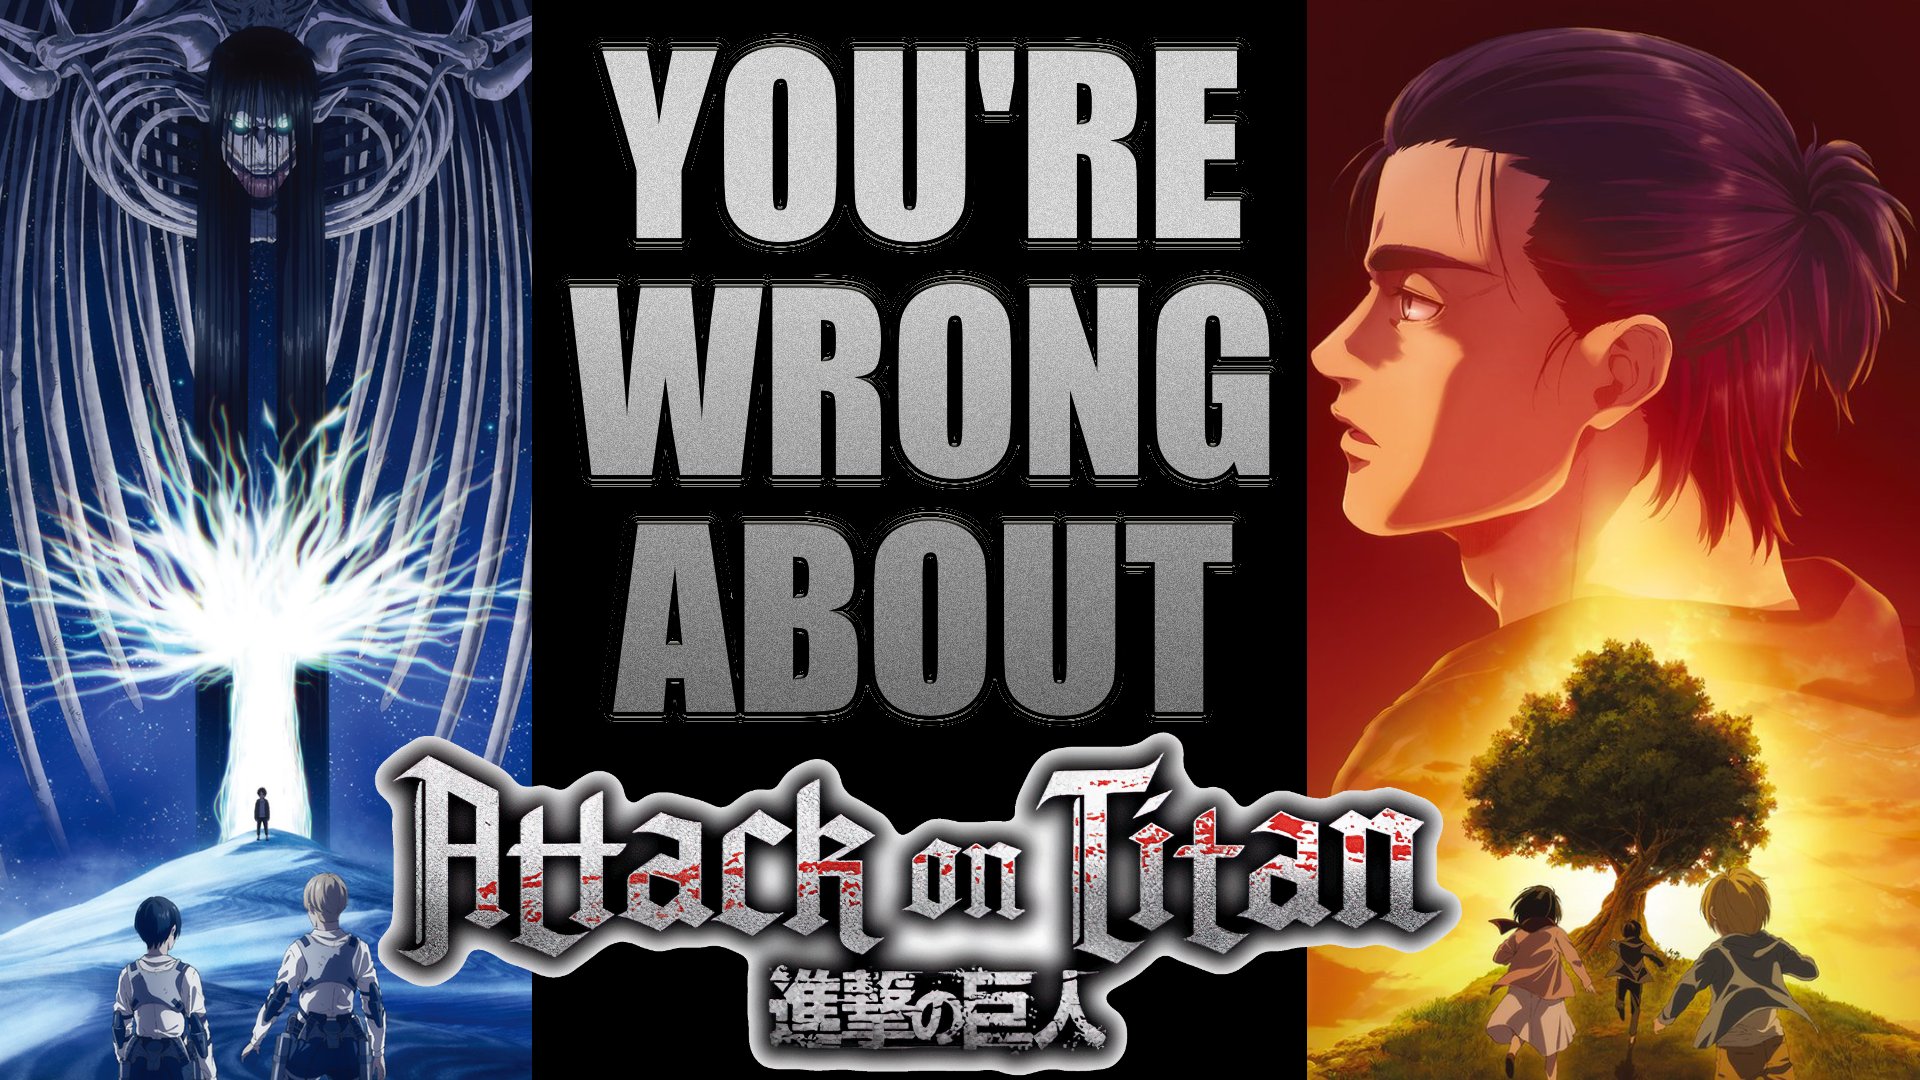 affiche du film “Attack on Titan” and the End of Media Literacy - You're Wrong about "Attack on Titan"